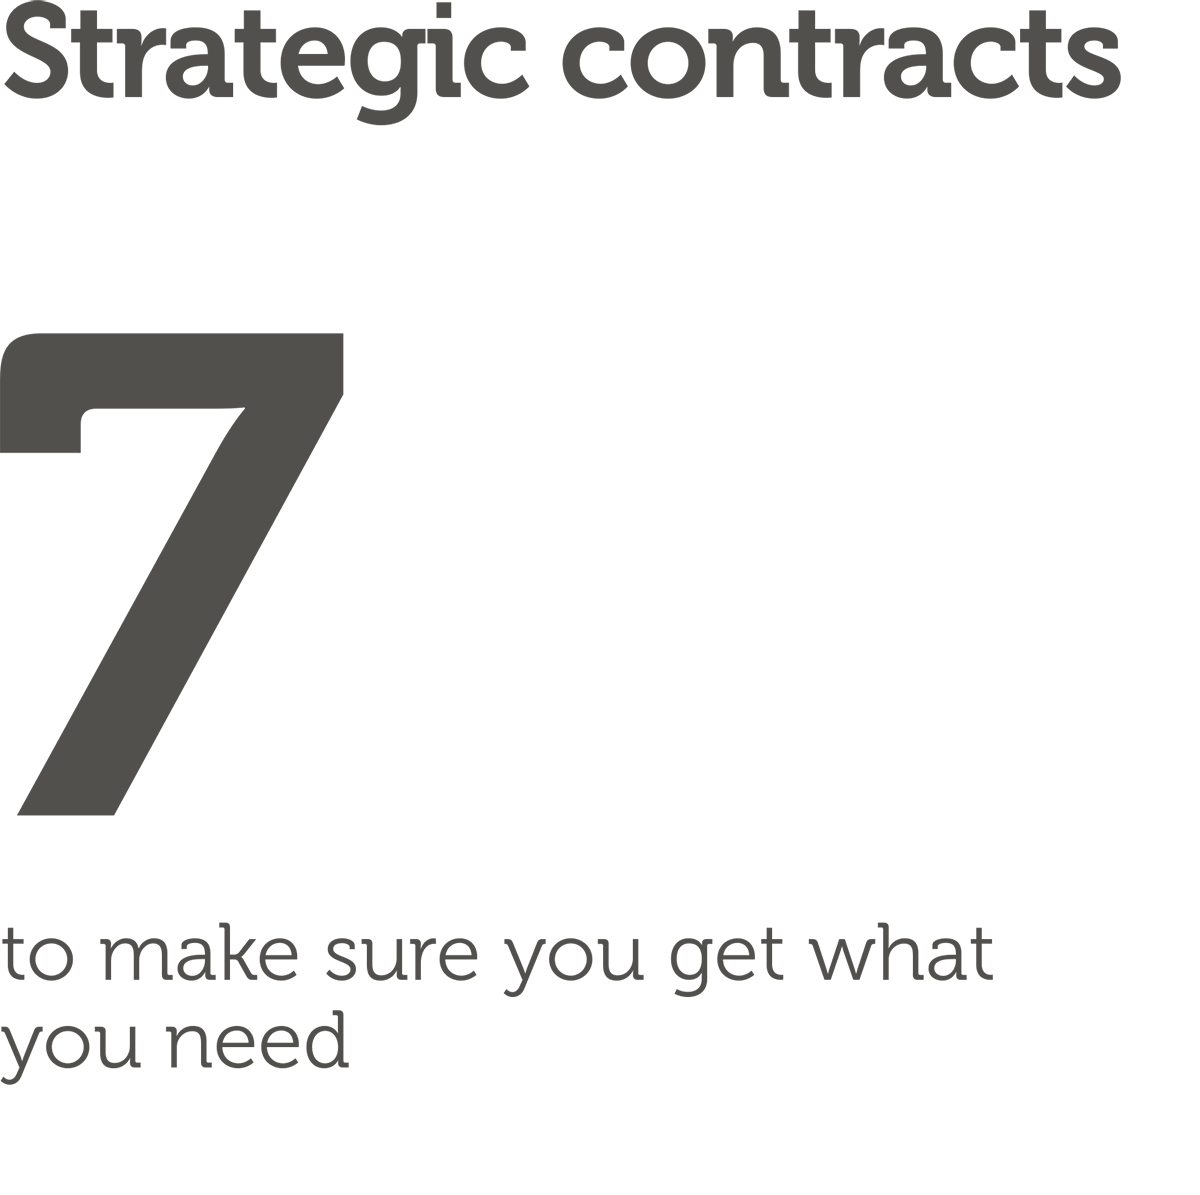 Strategic Contracts for Fintech. 7 Key Steps to make sure you get what you need and avoid the most common mistakes.